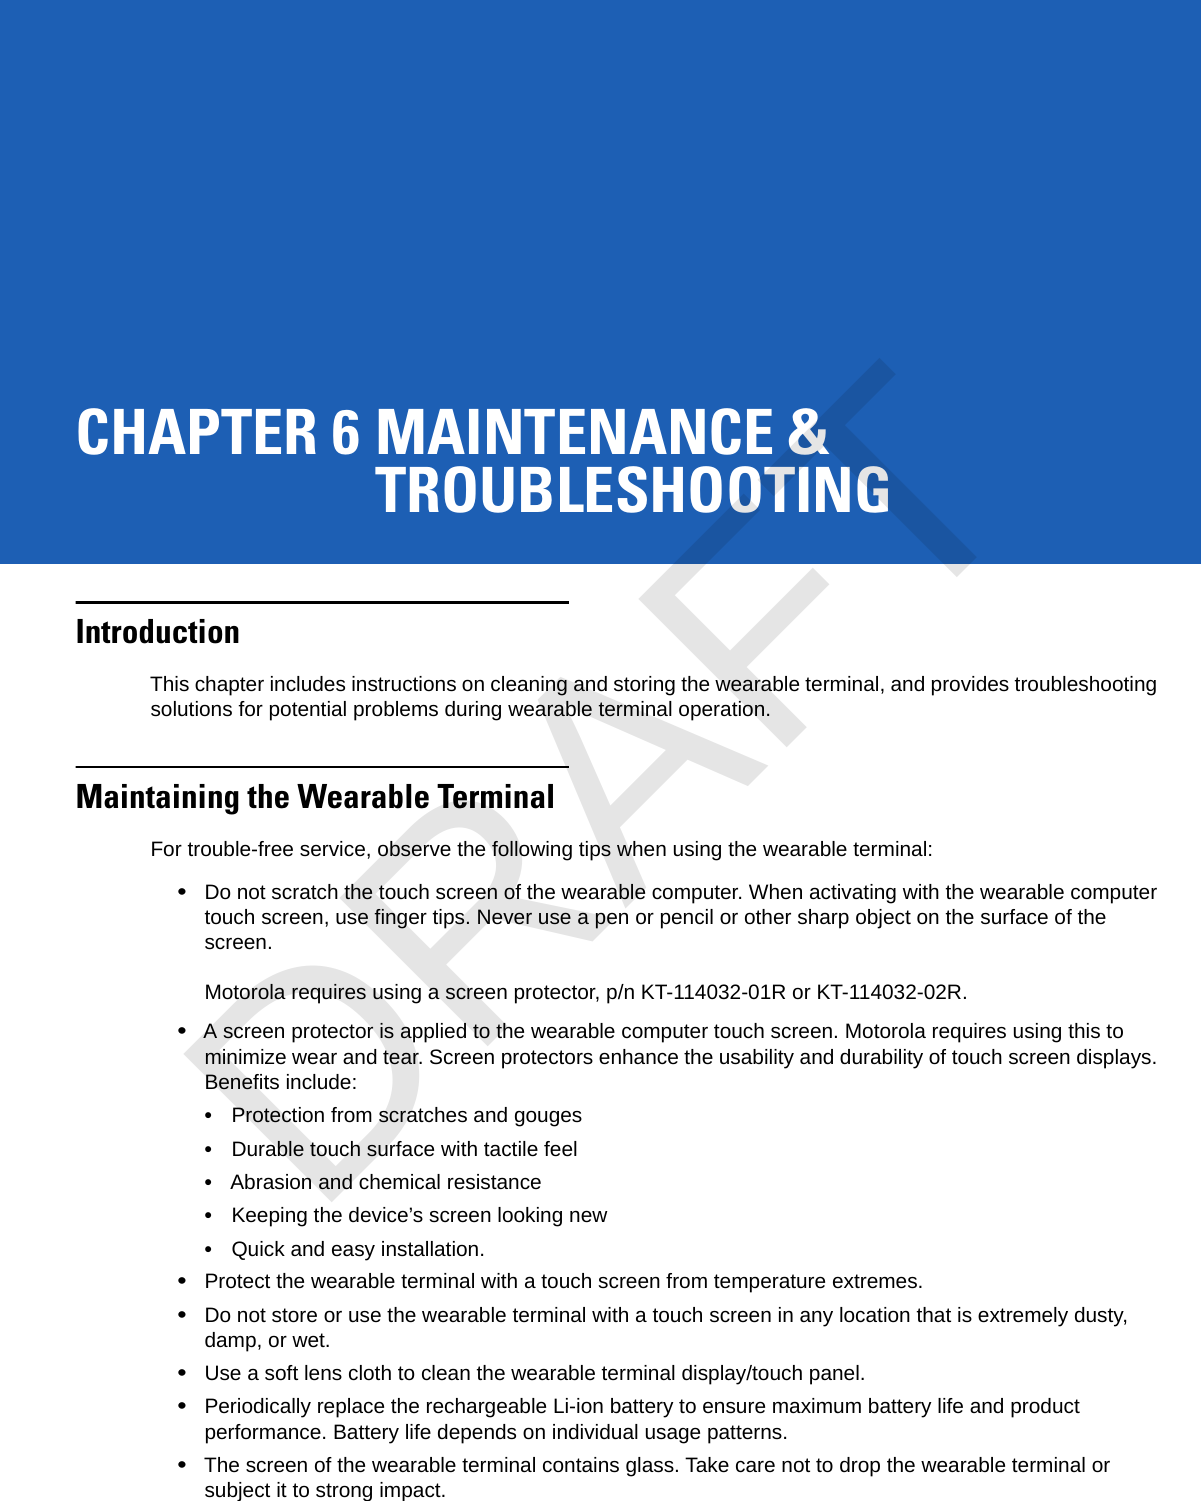 CHAPTER 6 MAINTENANCE &amp;TROUBLESHOOTINGIntroductionThis chapter includes instructions on cleaning and storing the wearable terminal, and provides troubleshooting solutions for potential problems during wearable terminal operation.Maintaining the Wearable TerminalFor trouble-free service, observe the following tips when using the wearable terminal:•Do not scratch the touch screen of the wearable computer. When activating with the wearable computer touch screen, use finger tips. Never use a pen or pencil or other sharp object on the surface of the screen.Motorola requires using a screen protector, p/n KT-114032-01R or KT-114032-02R.•A screen protector is applied to the wearable computer touch screen. Motorola requires using this to minimize wear and tear. Screen protectors enhance the usability and durability of touch screen displays. Benefits include:•Protection from scratches and gouges•Durable touch surface with tactile feel•Abrasion and chemical resistance•Keeping the device’s screen looking new•Quick and easy installation.•Protect the wearable terminal with a touch screen from temperature extremes.•Do not store or use the wearable terminal with a touch screen in any location that is extremely dusty, damp, or wet.•Use a soft lens cloth to clean the wearable terminal display/touch panel.•Periodically replace the rechargeable Li-ion battery to ensure maximum battery life and product performance. Battery life depends on individual usage patterns.•The screen of the wearable terminal contains glass. Take care not to drop the wearable terminal or subject it to strong impact.DRAFT